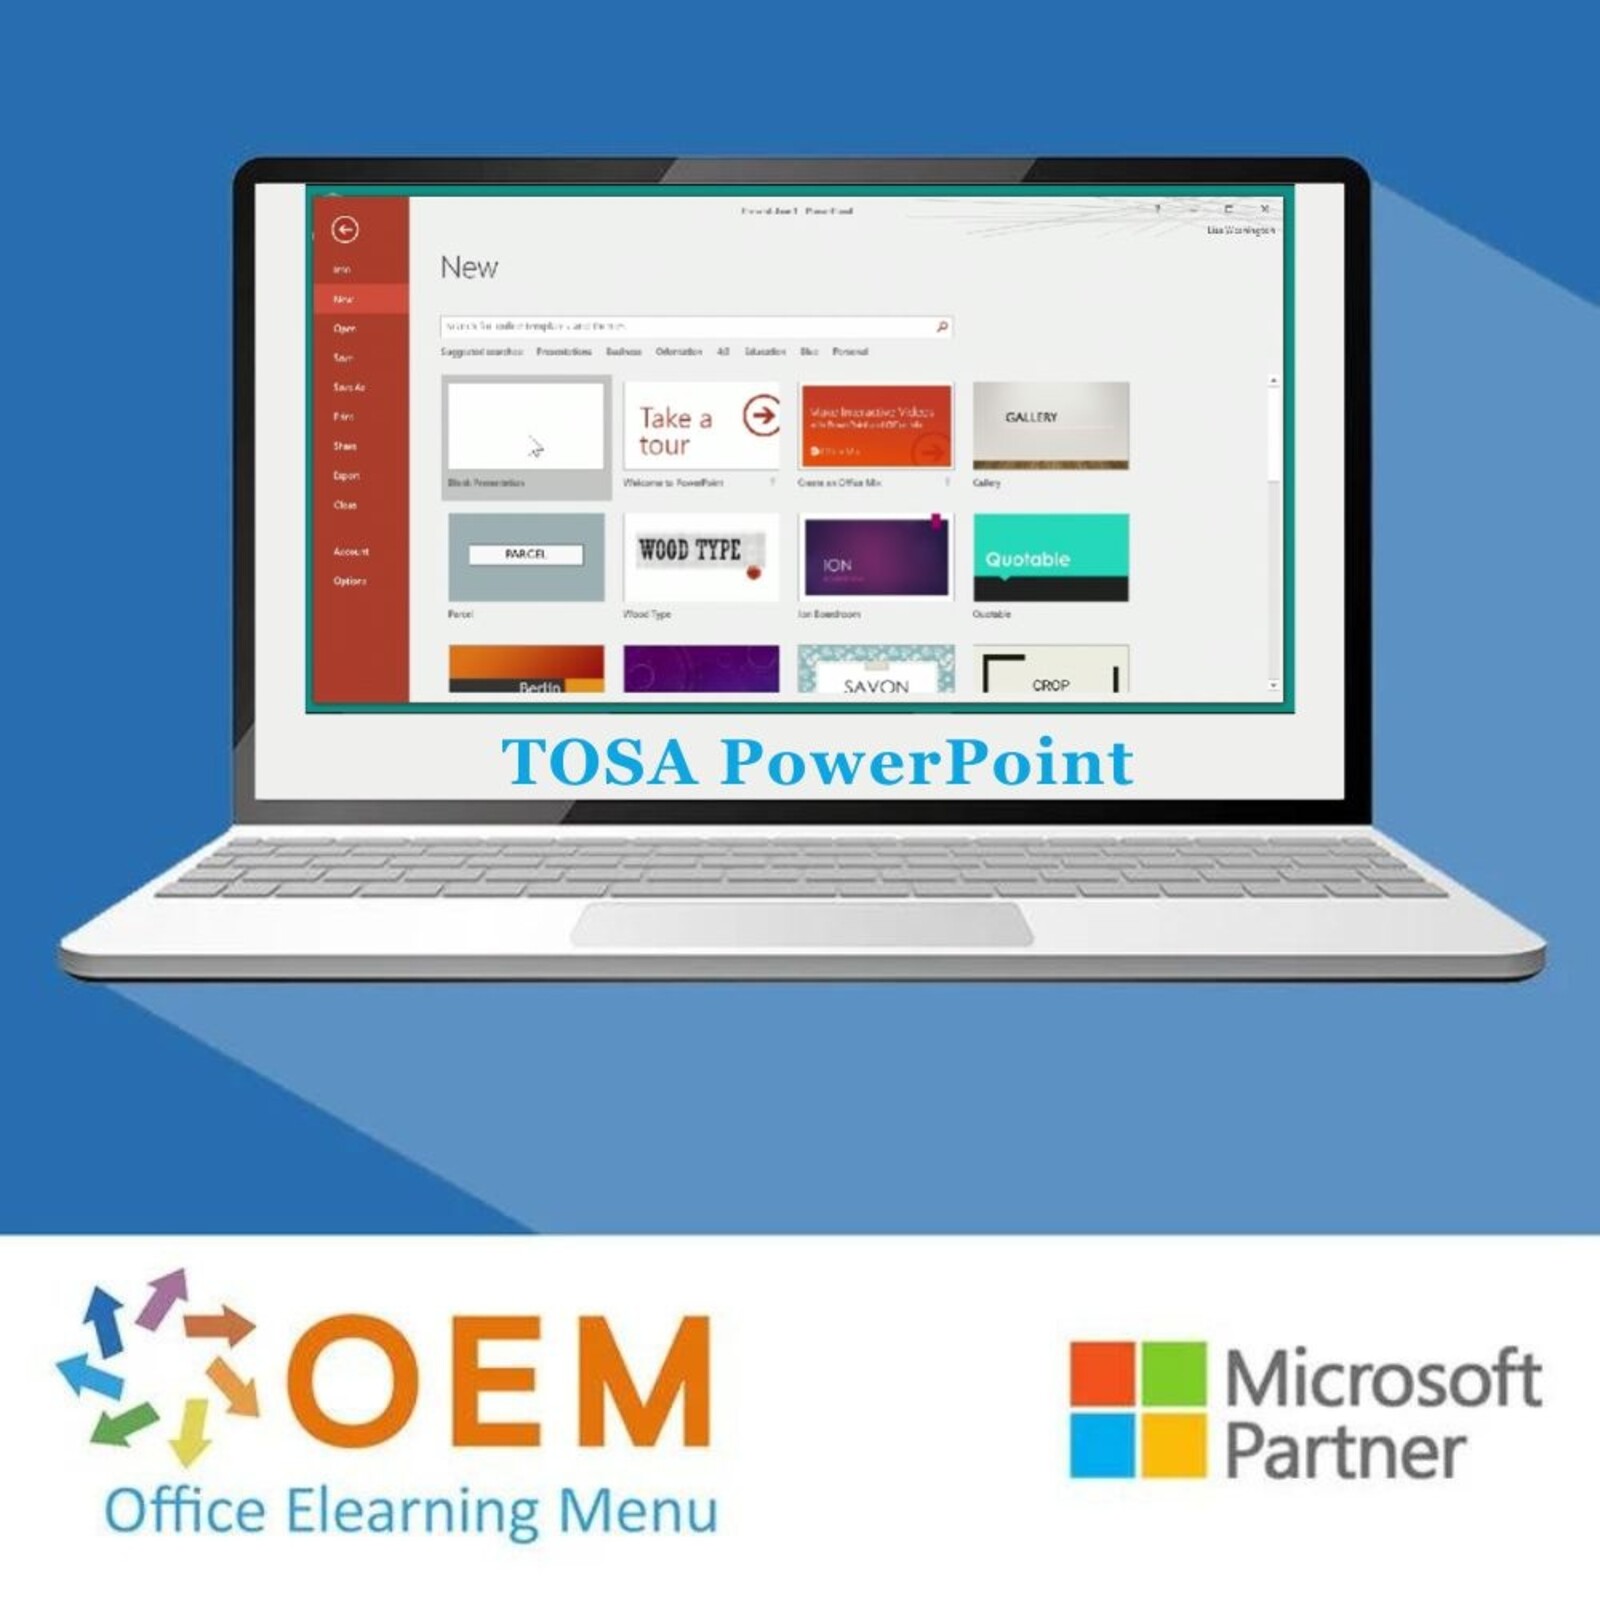 Microsoft PowerPoint TOSA PowerPoint Cursus E-Learning